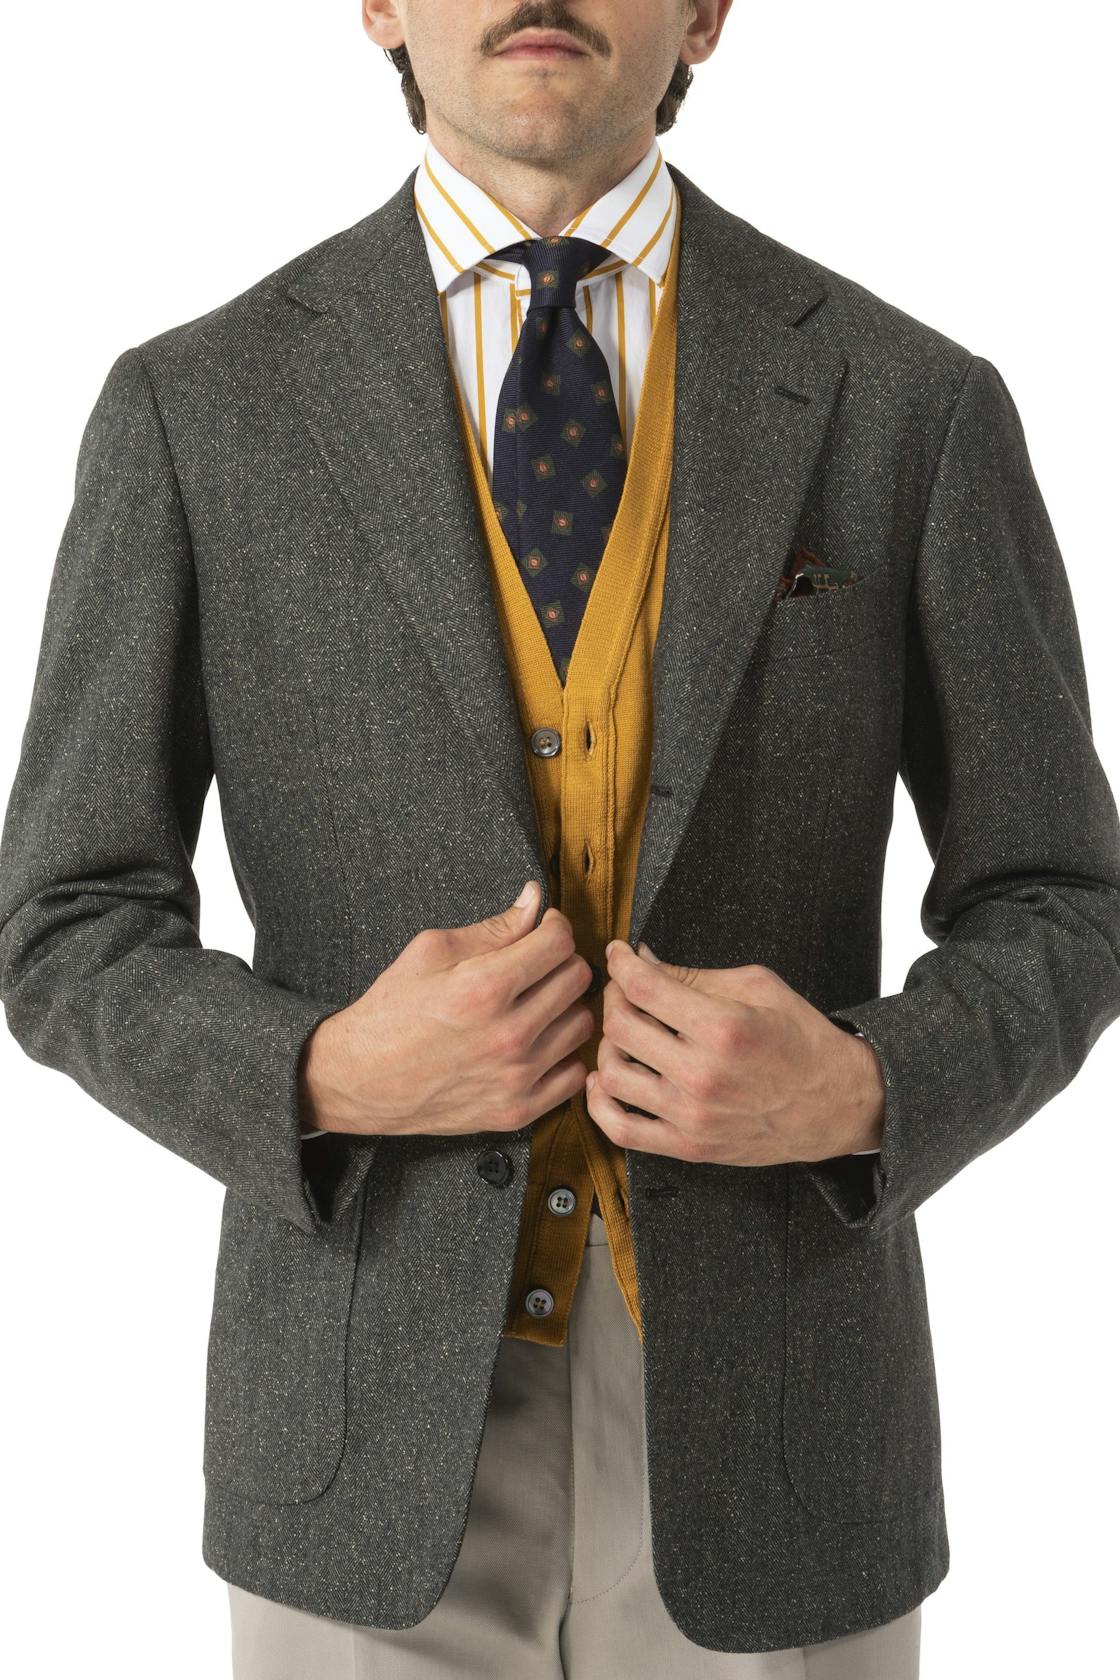 The Armoury by Ring Jacket Model 3 Olive Wool-Silk Donegal Herringbone Sport Coat